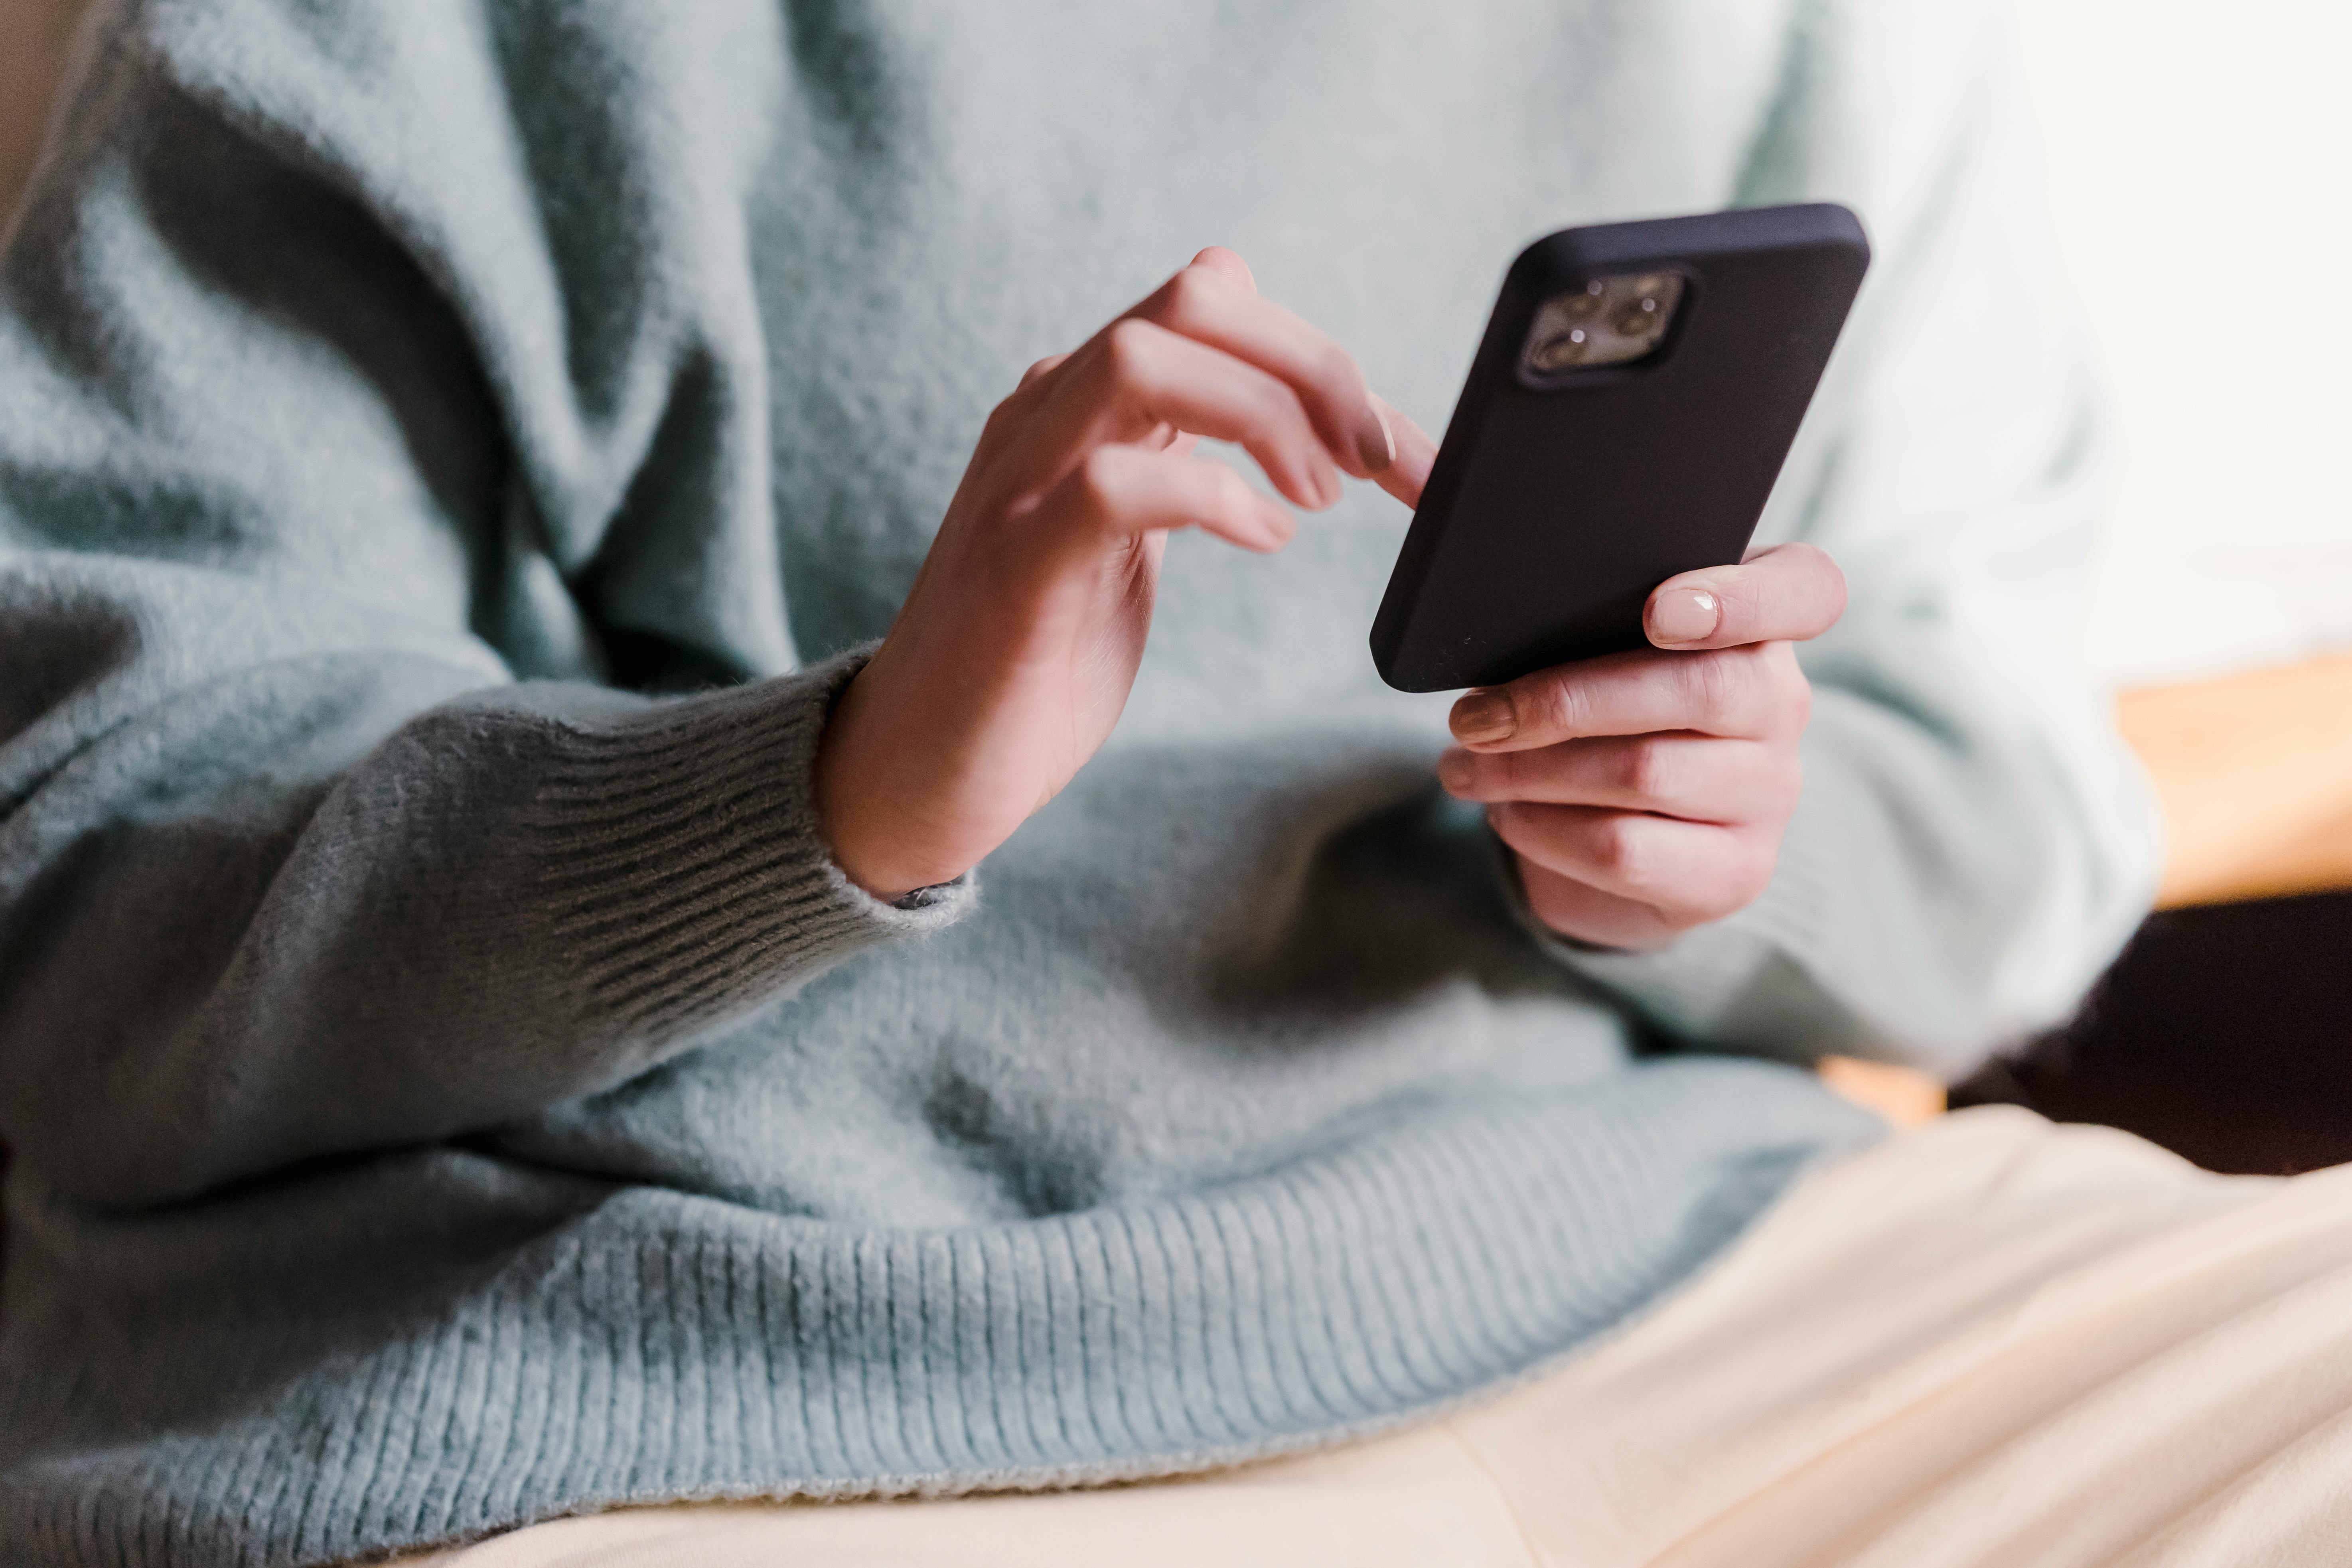 A woman holding her phone | Source: Pexels